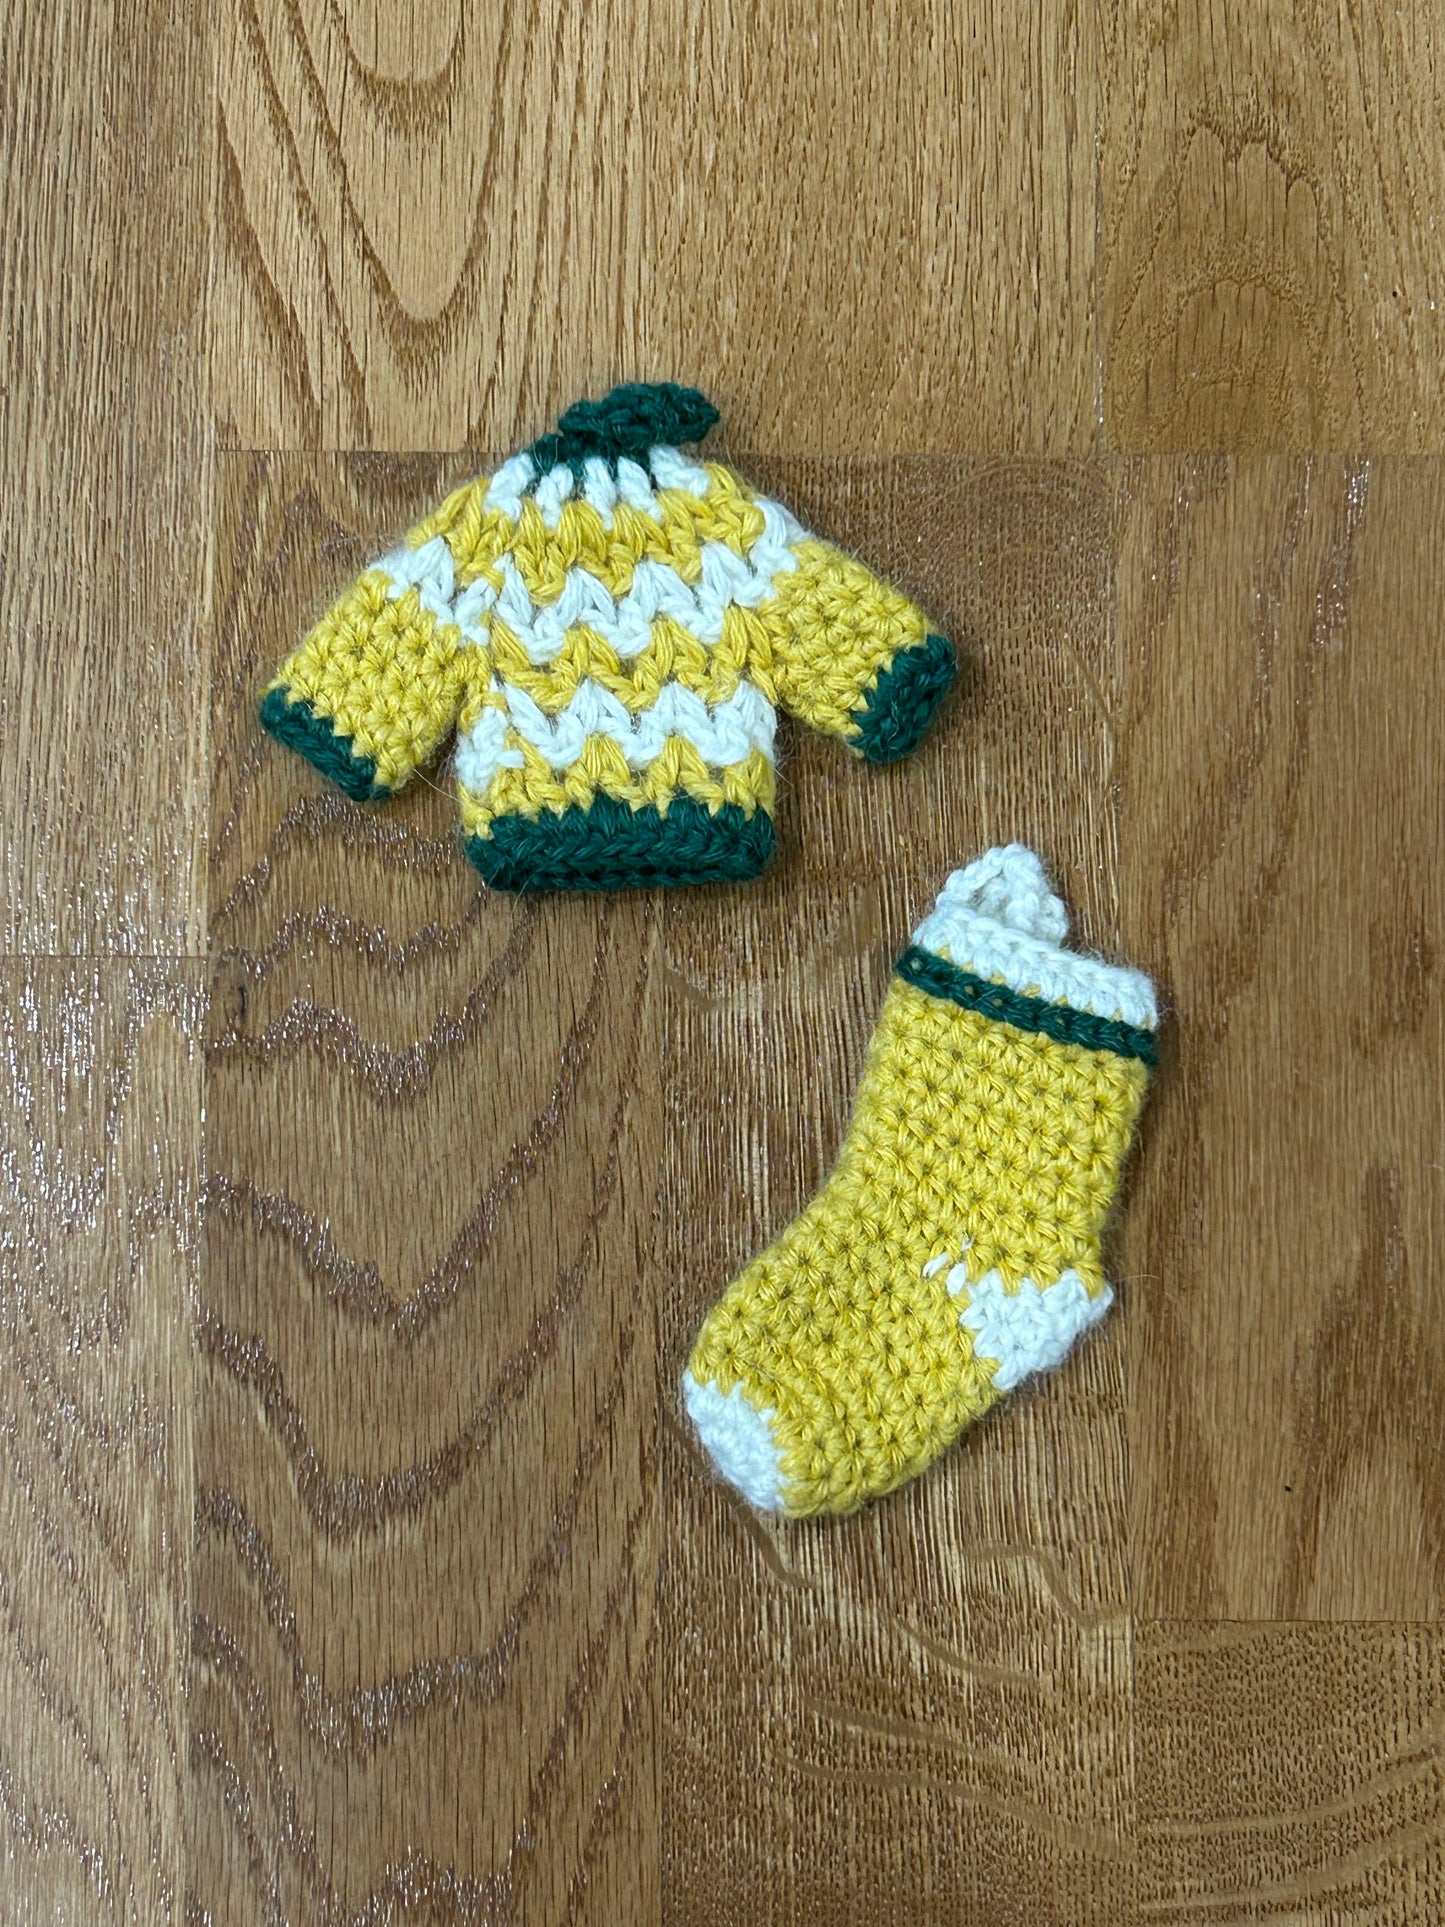 Knitted Ornaments